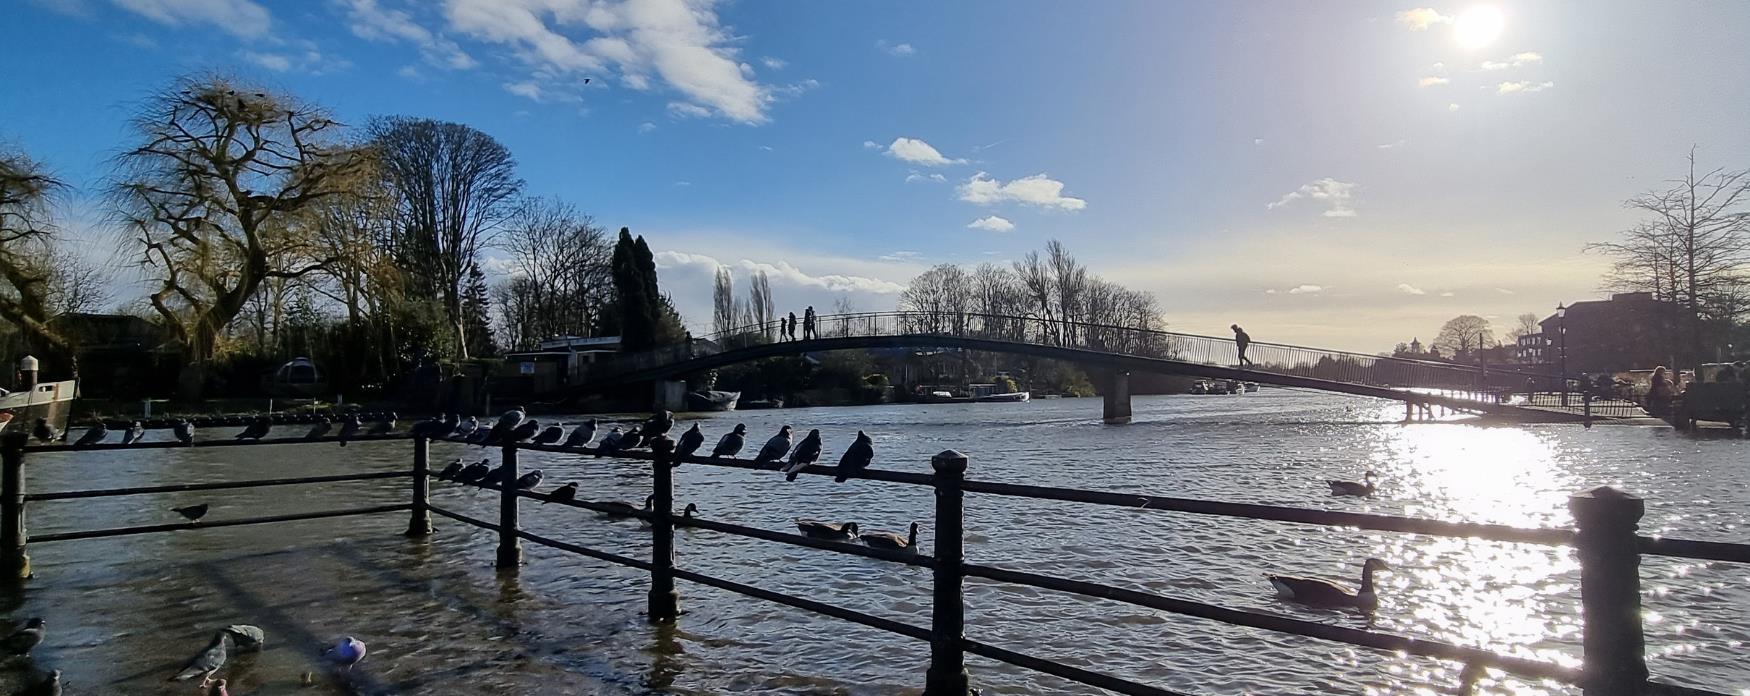 A beautiful shot of Twickenham Riverside with a lot of pigeons in the frame